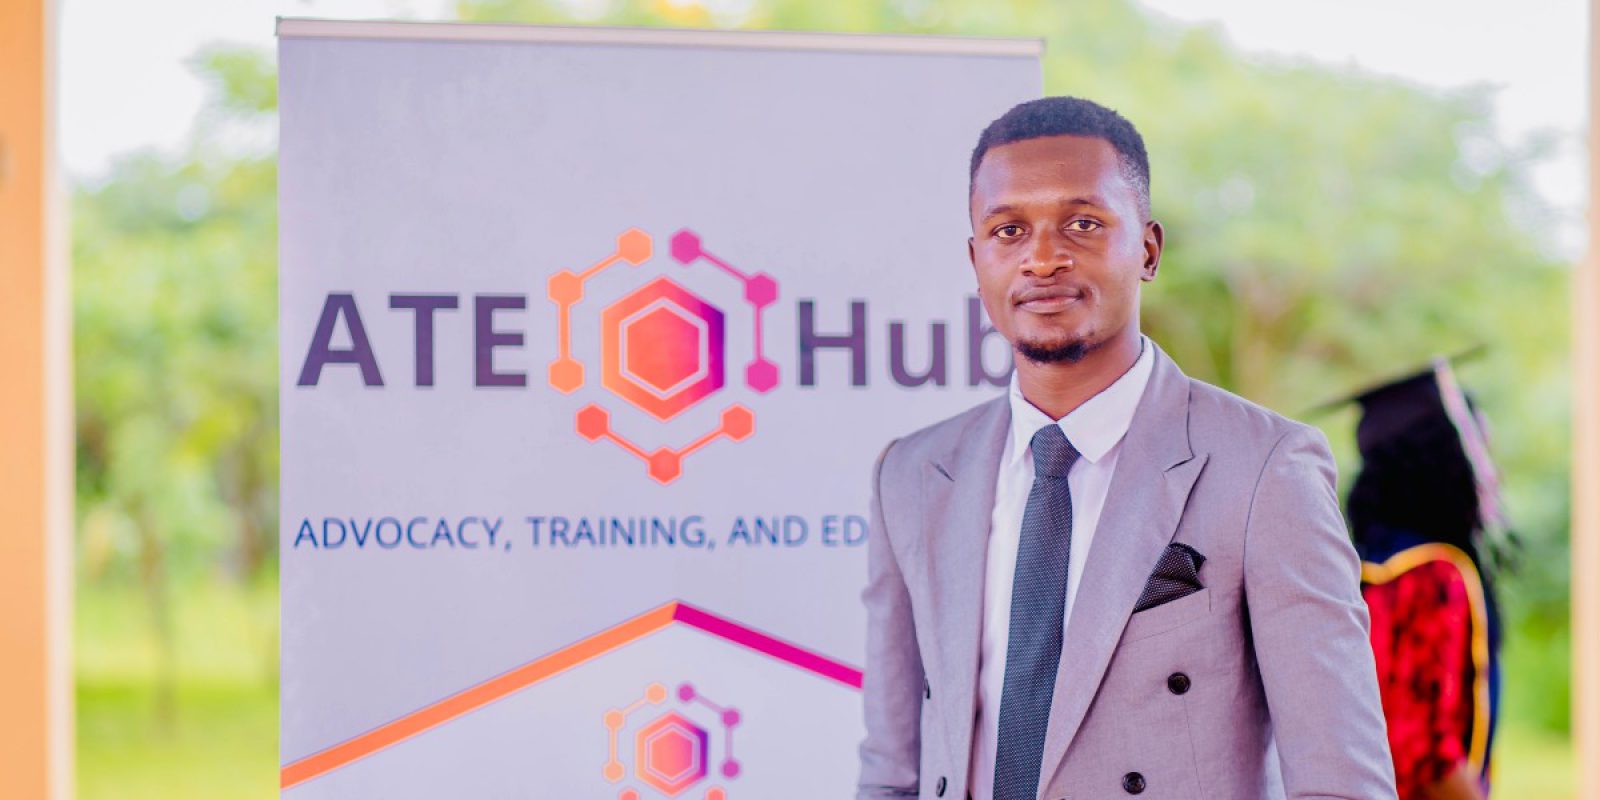 Emmanuel co-founder & Executive Director at ATE-Hub, a refugee-led organisation based in the Dzaleka refugee camp. In the Dzaleka refugee camp some refugee students started an organisation to assist refugees in accessing employment and learning opportunities .